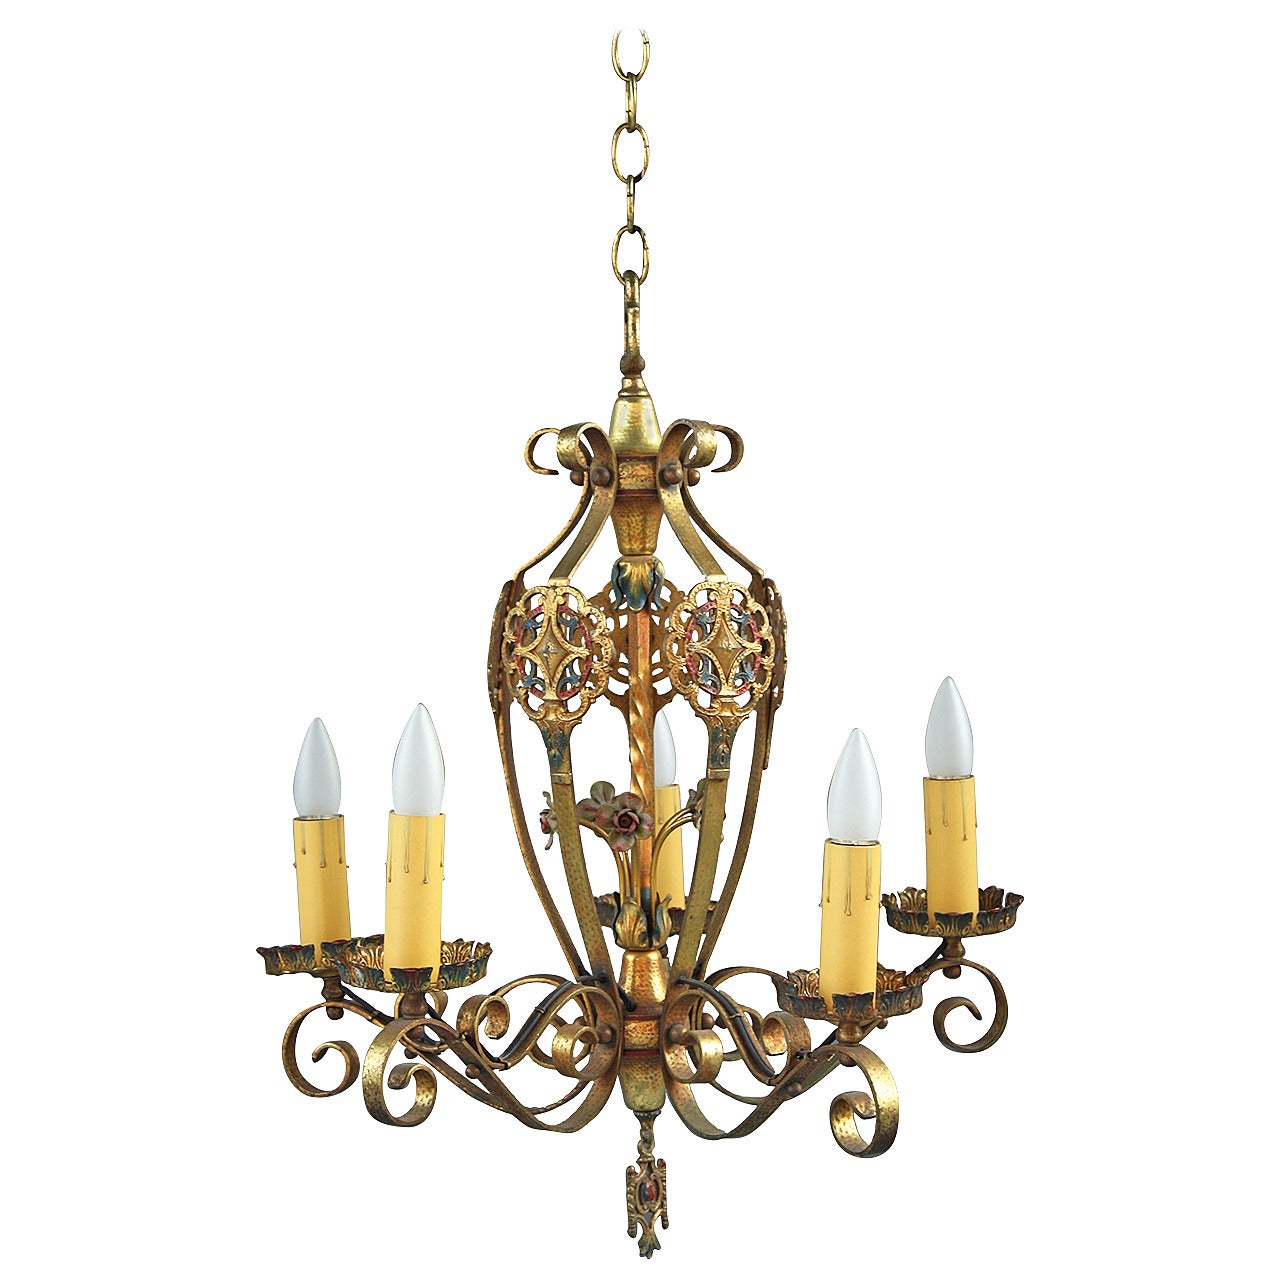 Vibrant 1920s Chandelier with Original Polychrome For Sale